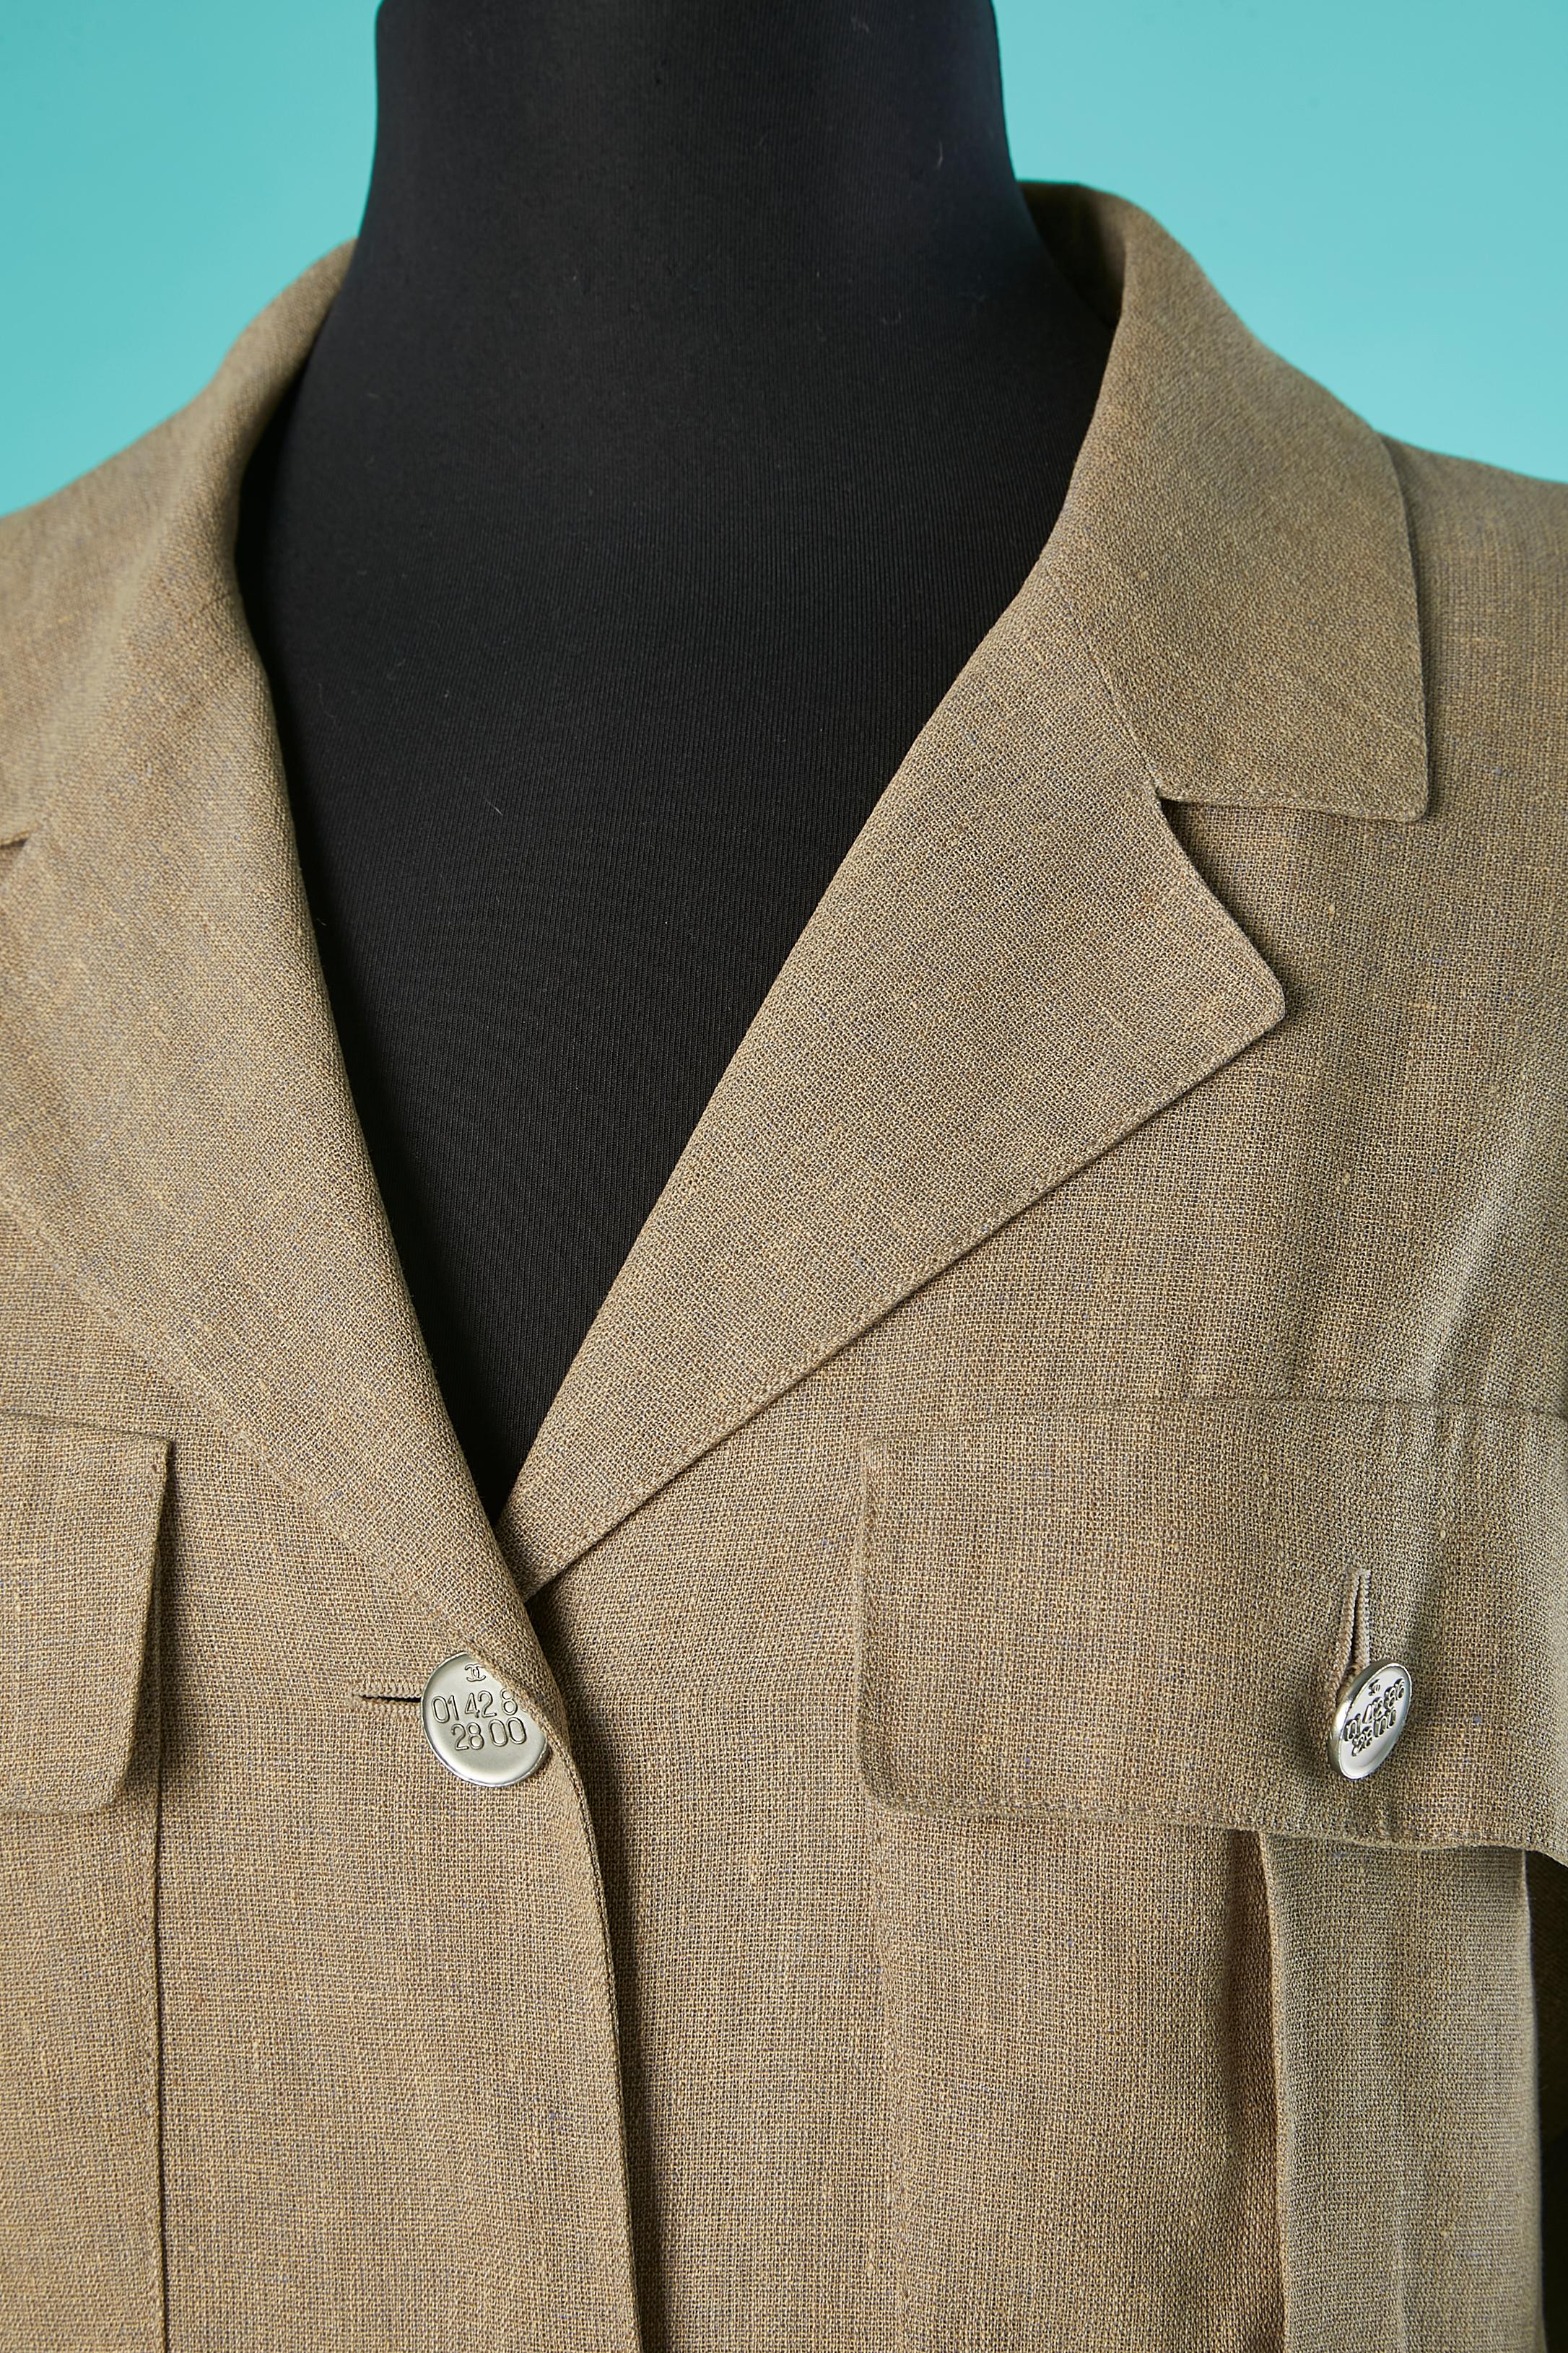 Single-breasted linen Safari jacket. Silk branded lining from the top until the waist. BRANDED BUTTONS.
SIZE 42 (fR) 12 (US)
